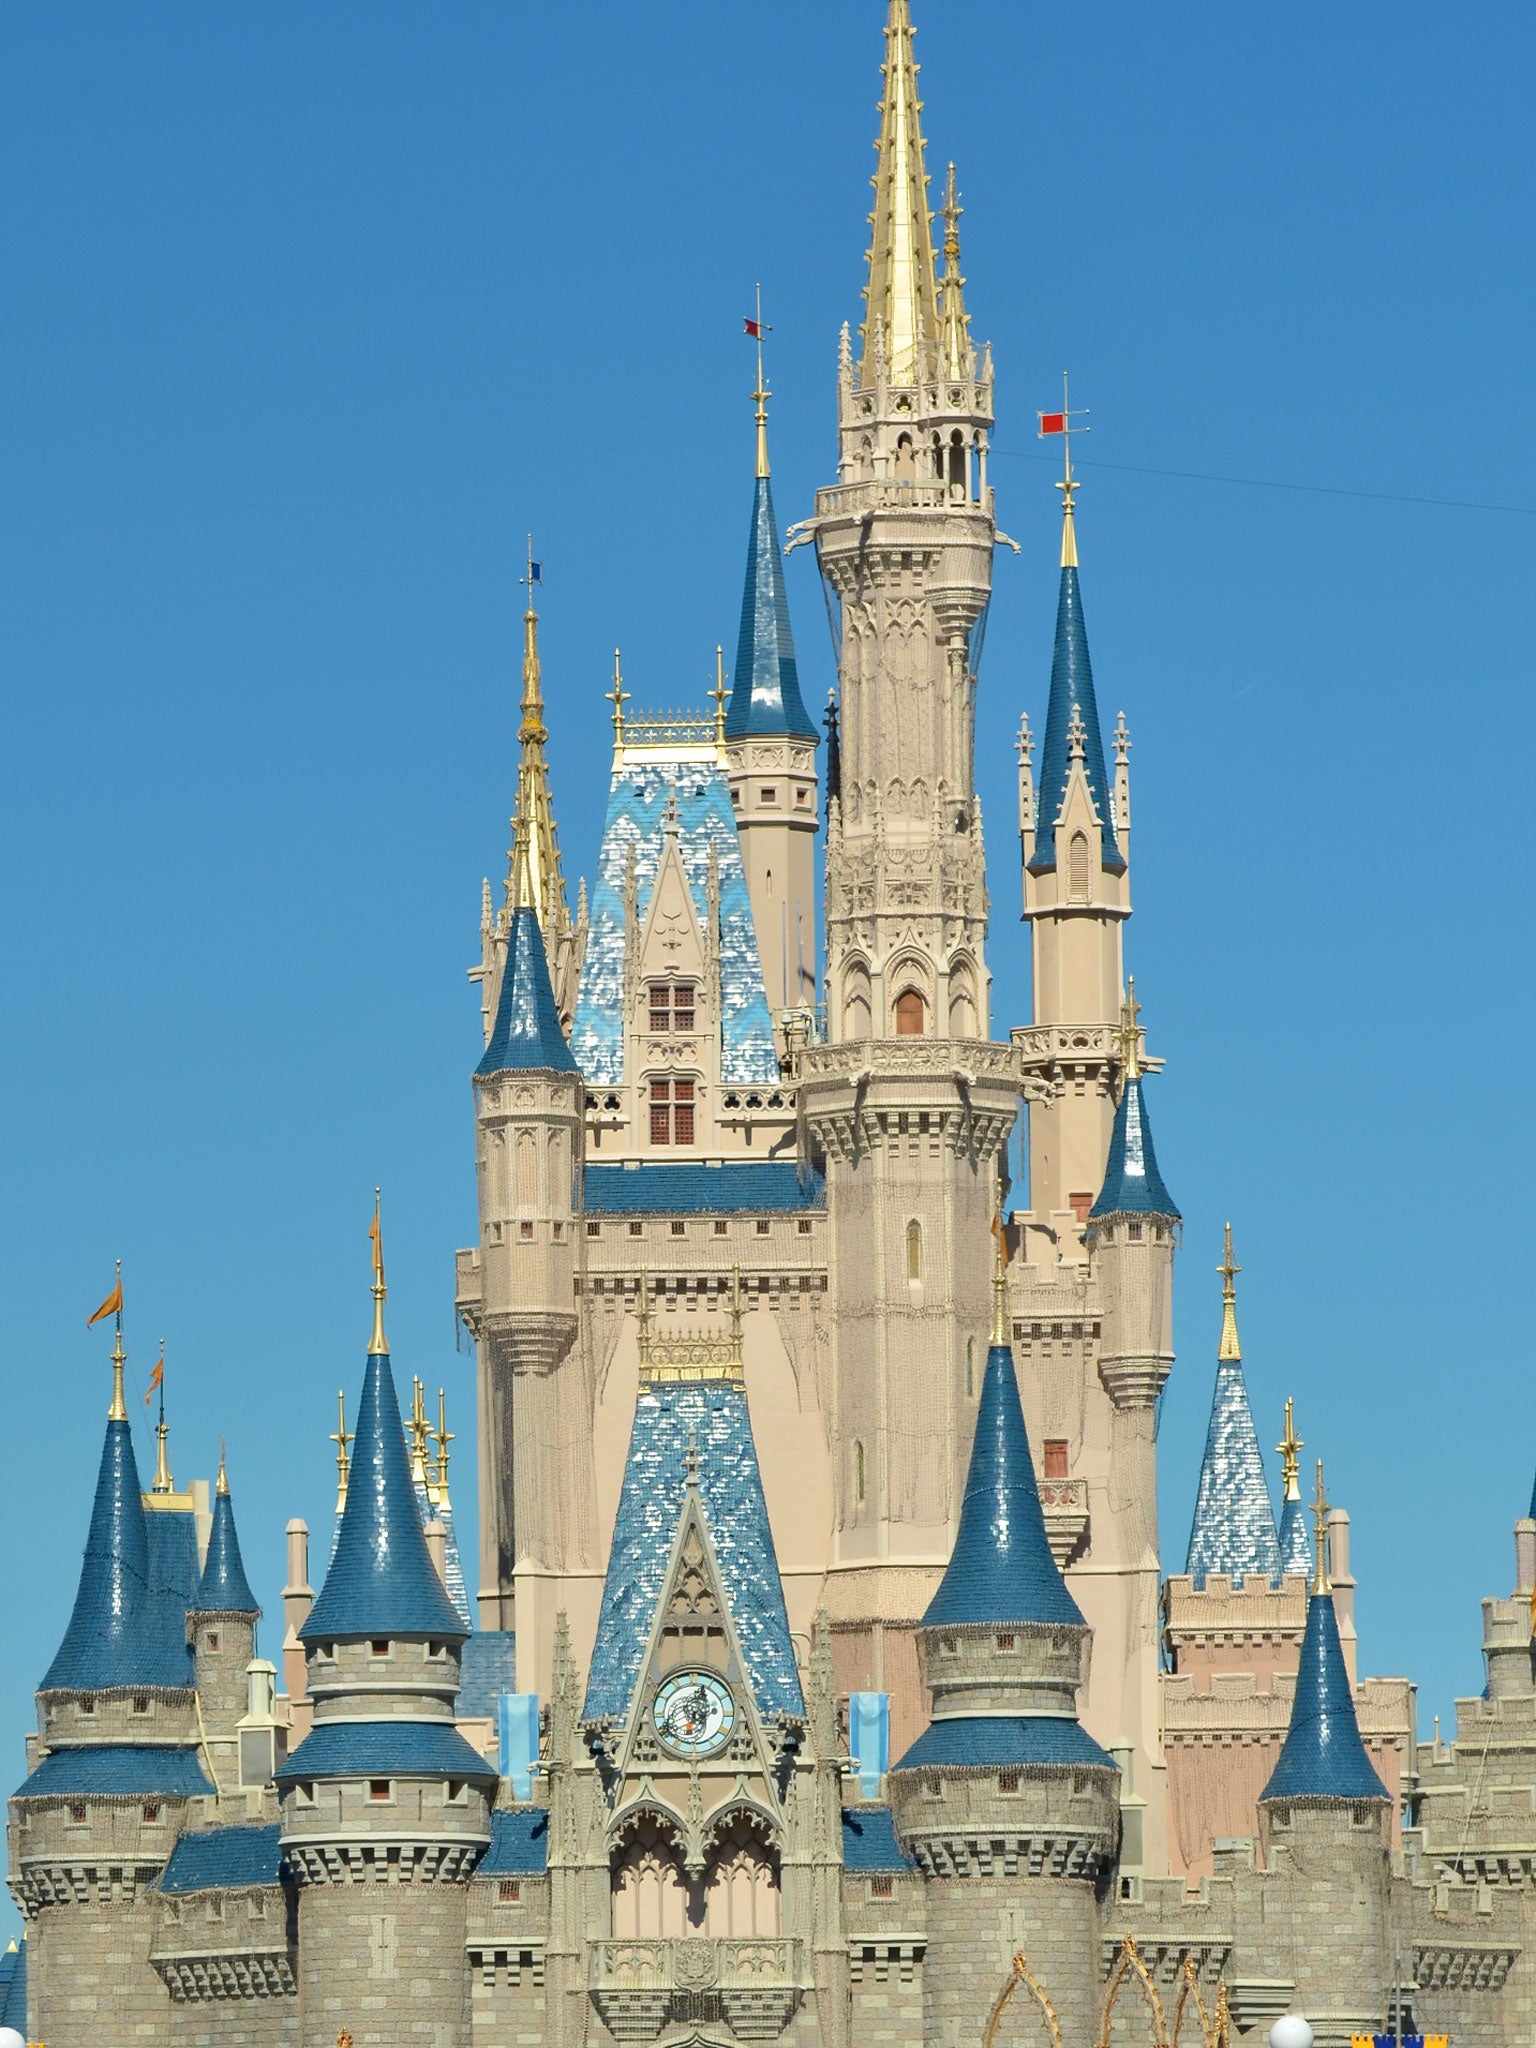 Walt Disney World's decision was welcomed by campaign group Scouts for Equality